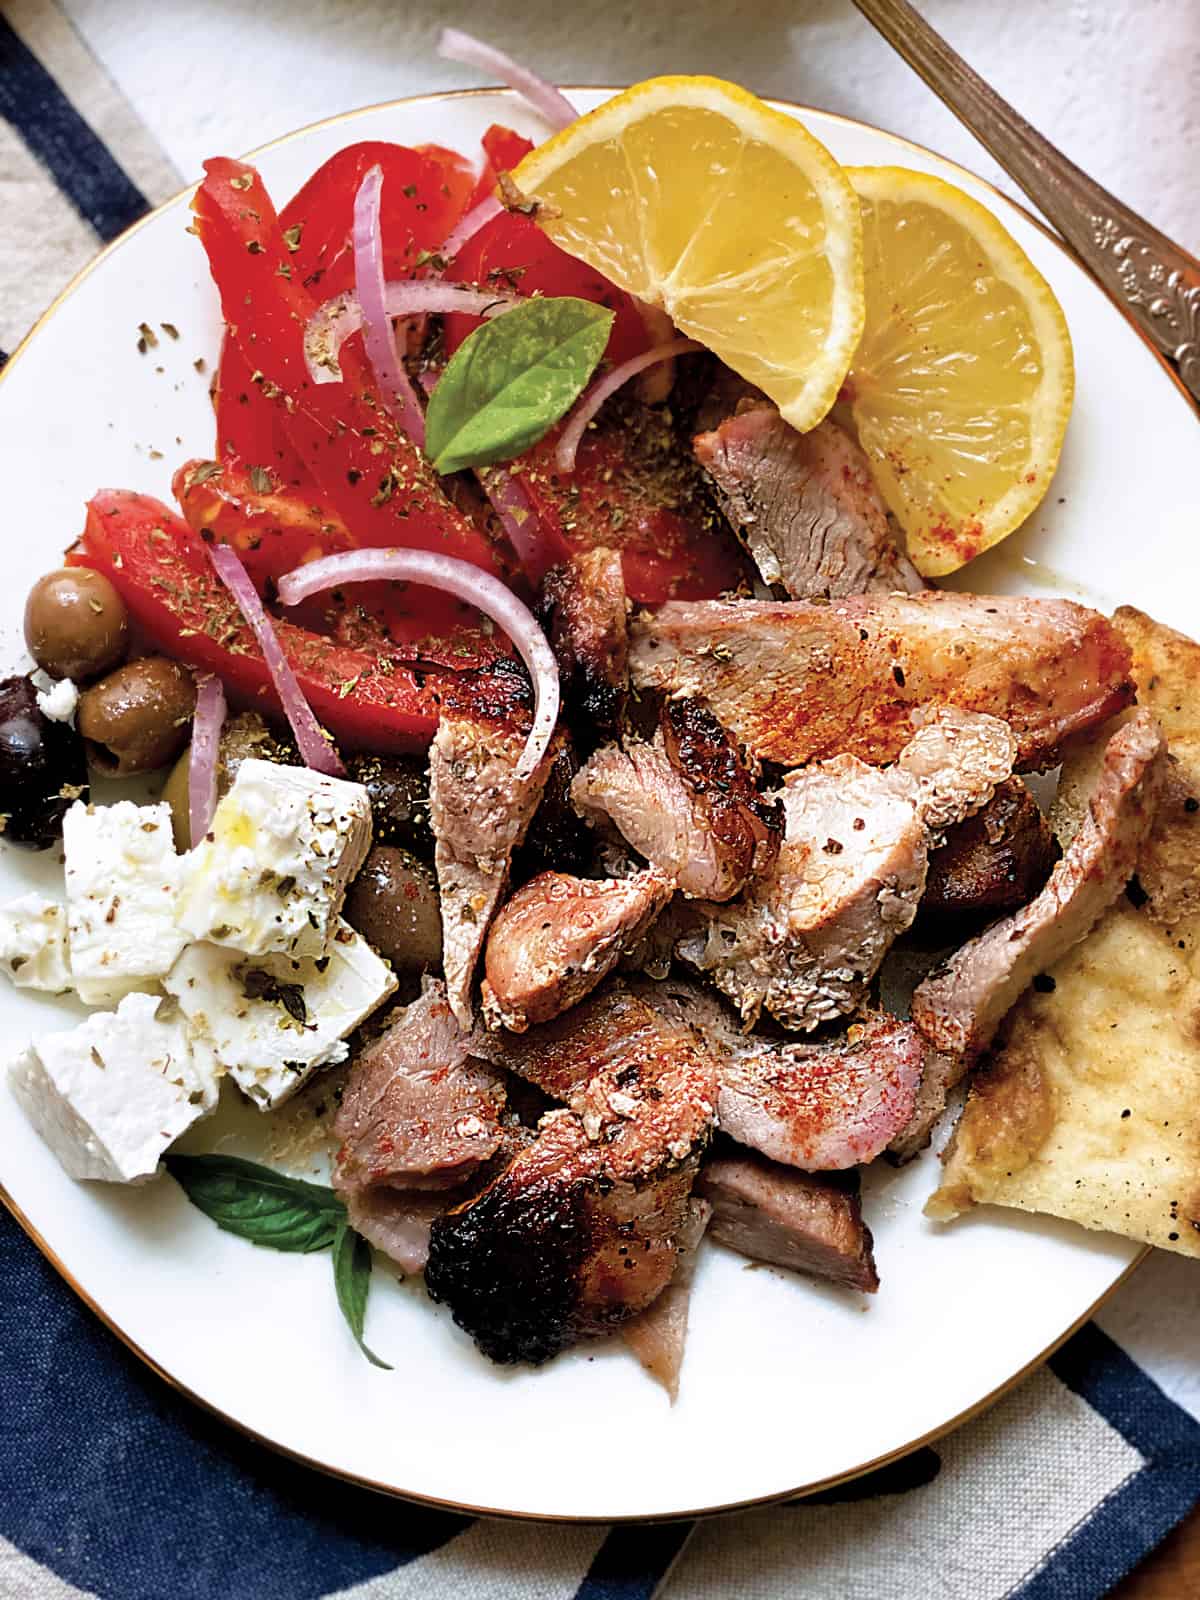 A plate with sliced tomatoes and onions, olives, feta cheese cubes, pieces of greek gyro lemon wedges and pitas.